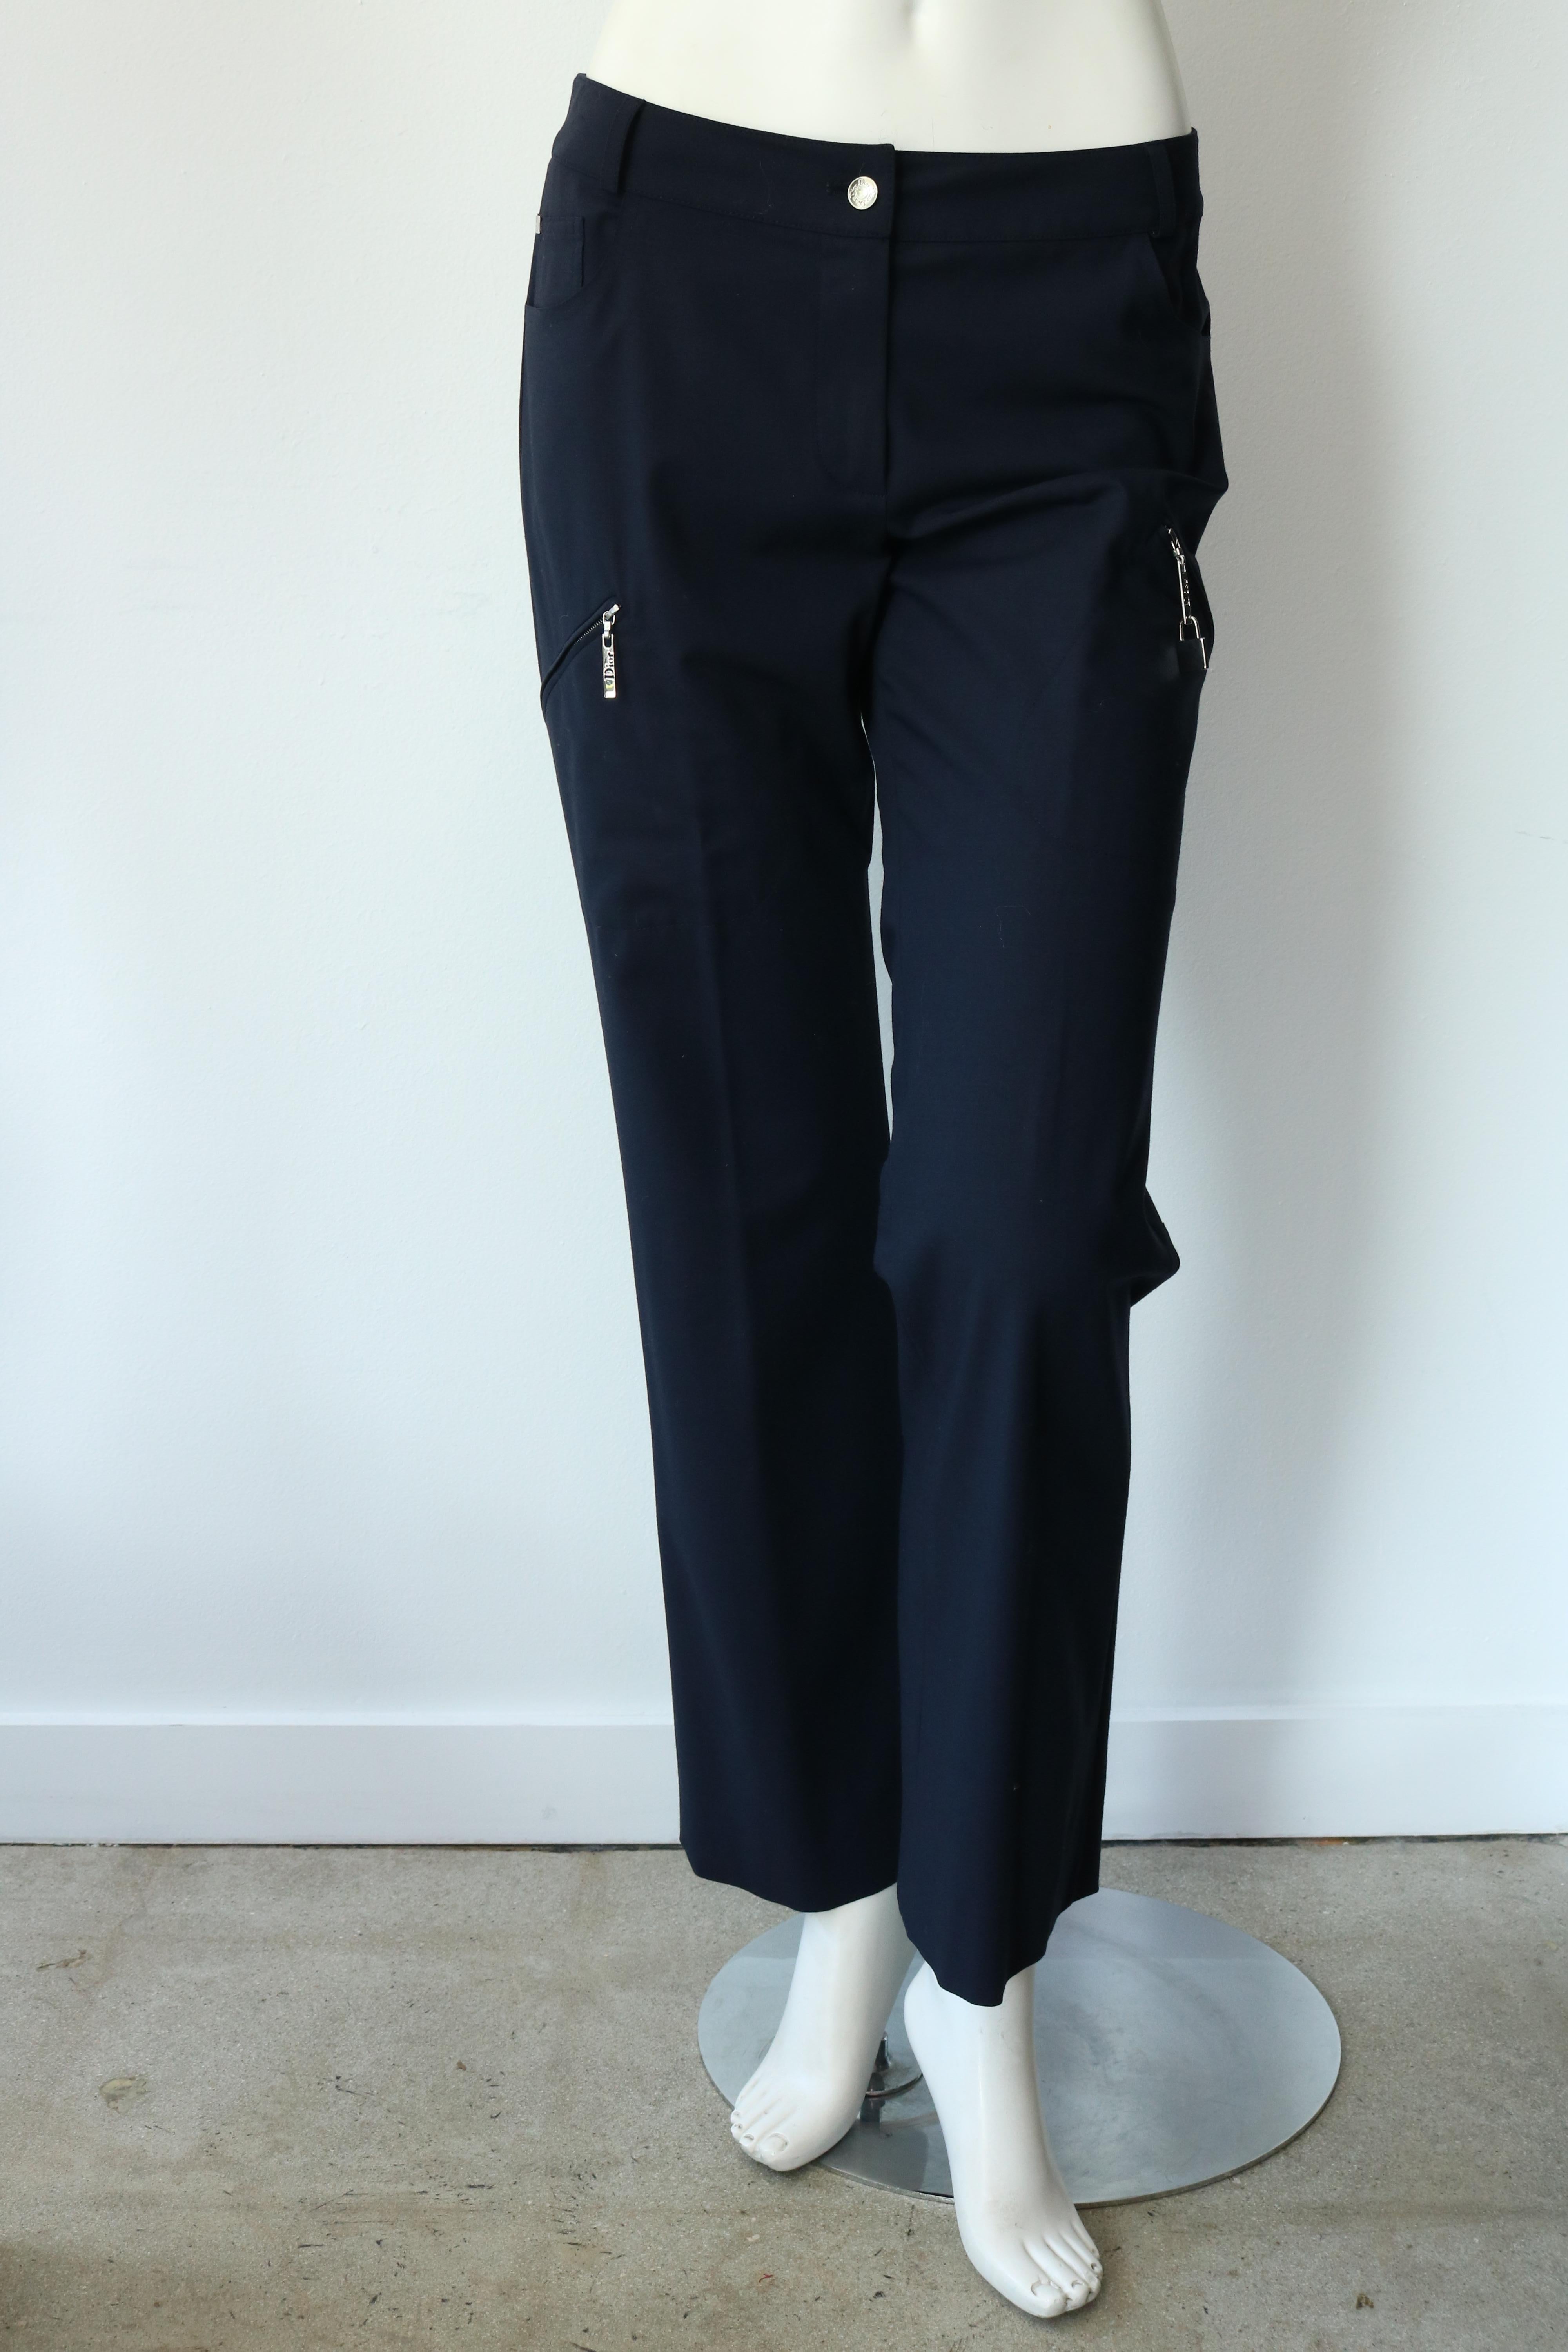 Christian Dior Navy Blue Jacket and Trouser Ensemble Size US 6  For Sale 9